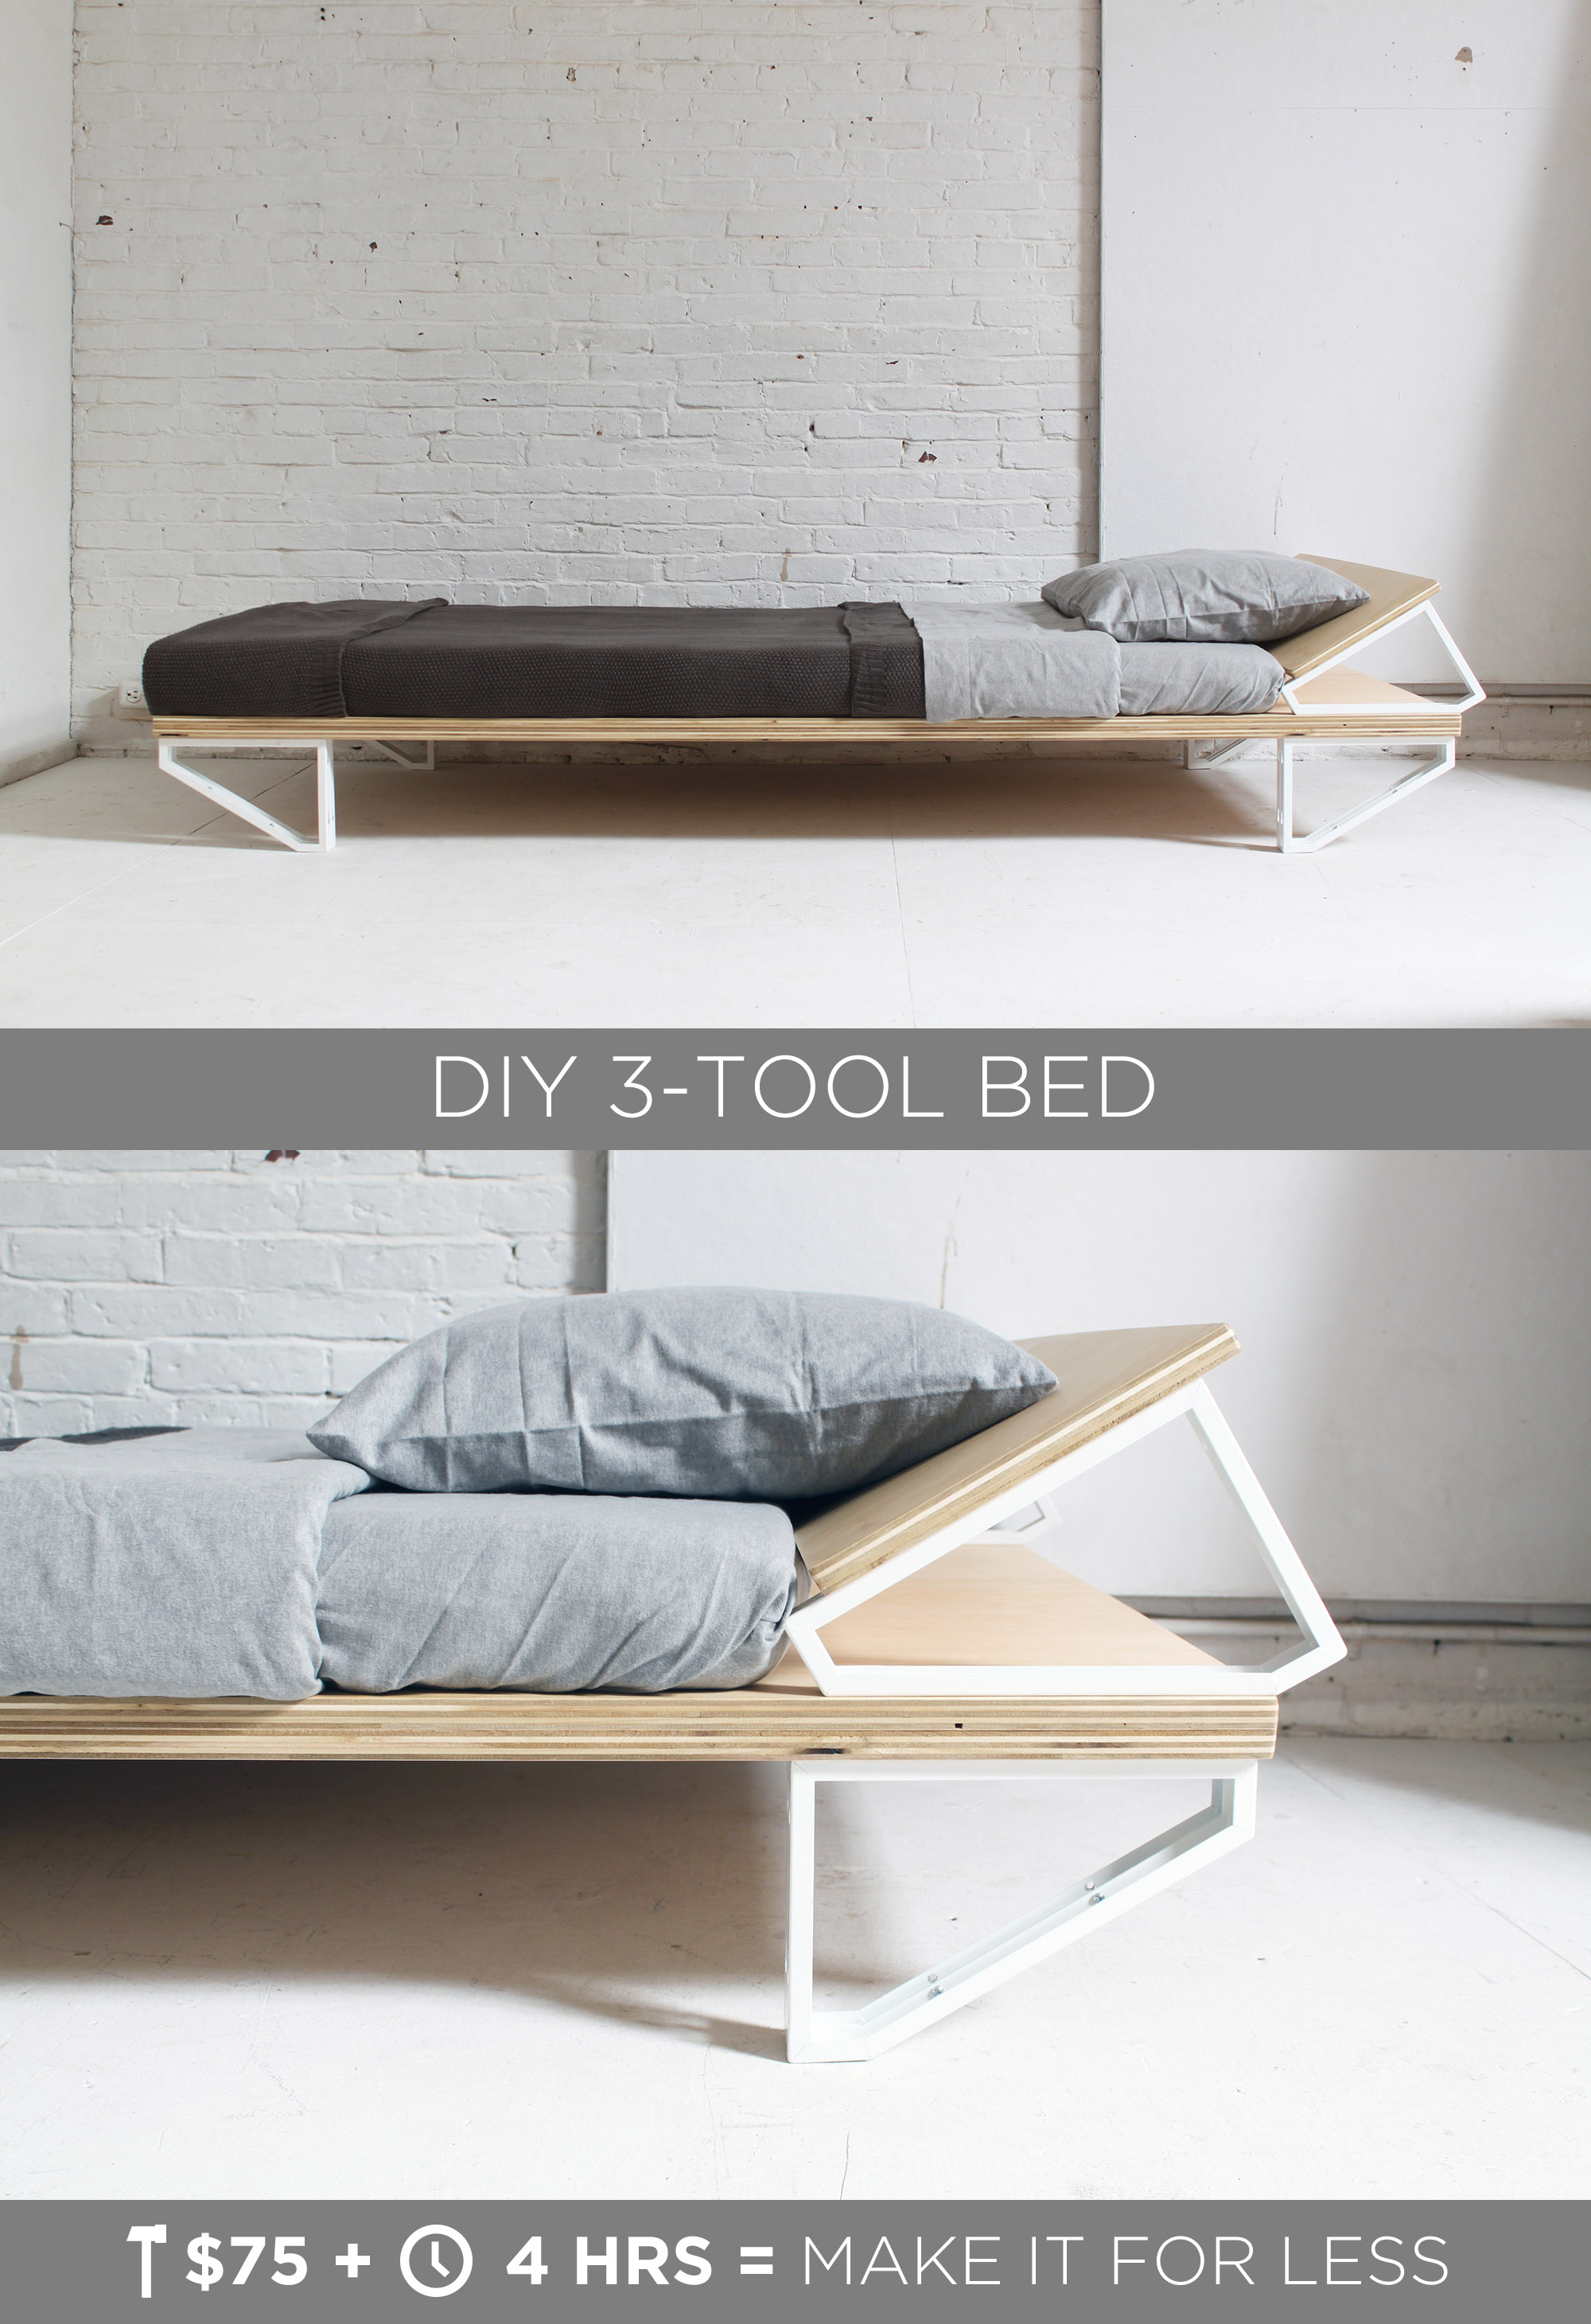 This DIY Modern Bed is made from a sheet of ¾” plywood, and 10 ikea shelf brackets. The materials cost  less than $100 and only 3 power tools are needed to build it. Full instructions can be found at HomeMade-Modern.com